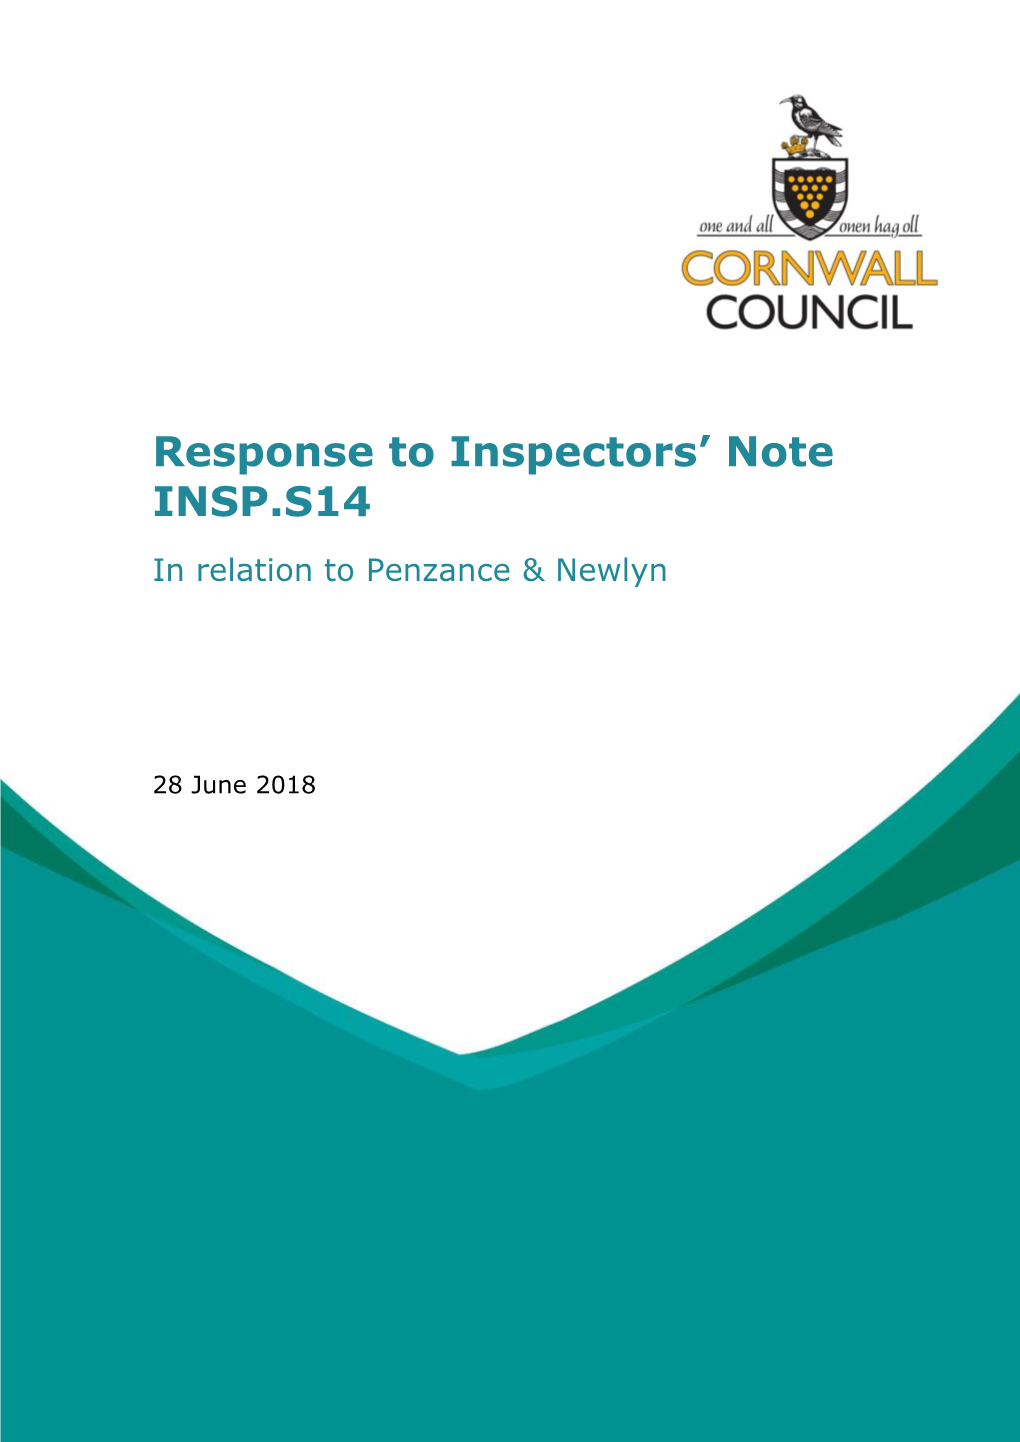 Response to Inspectors' Note INSP.S14